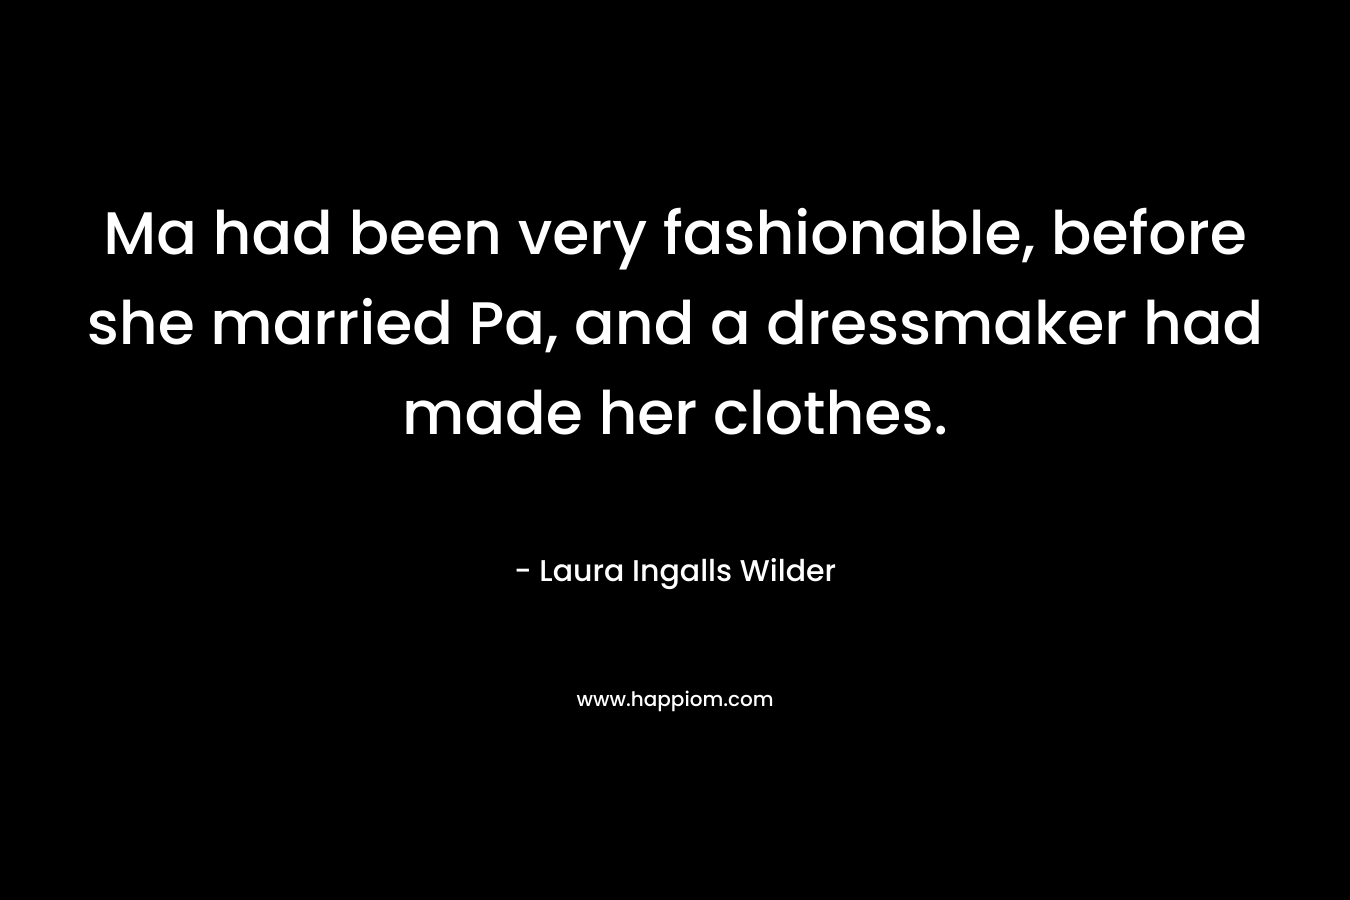 Ma had been very fashionable, before she married Pa, and a dressmaker had made her clothes. – Laura Ingalls Wilder